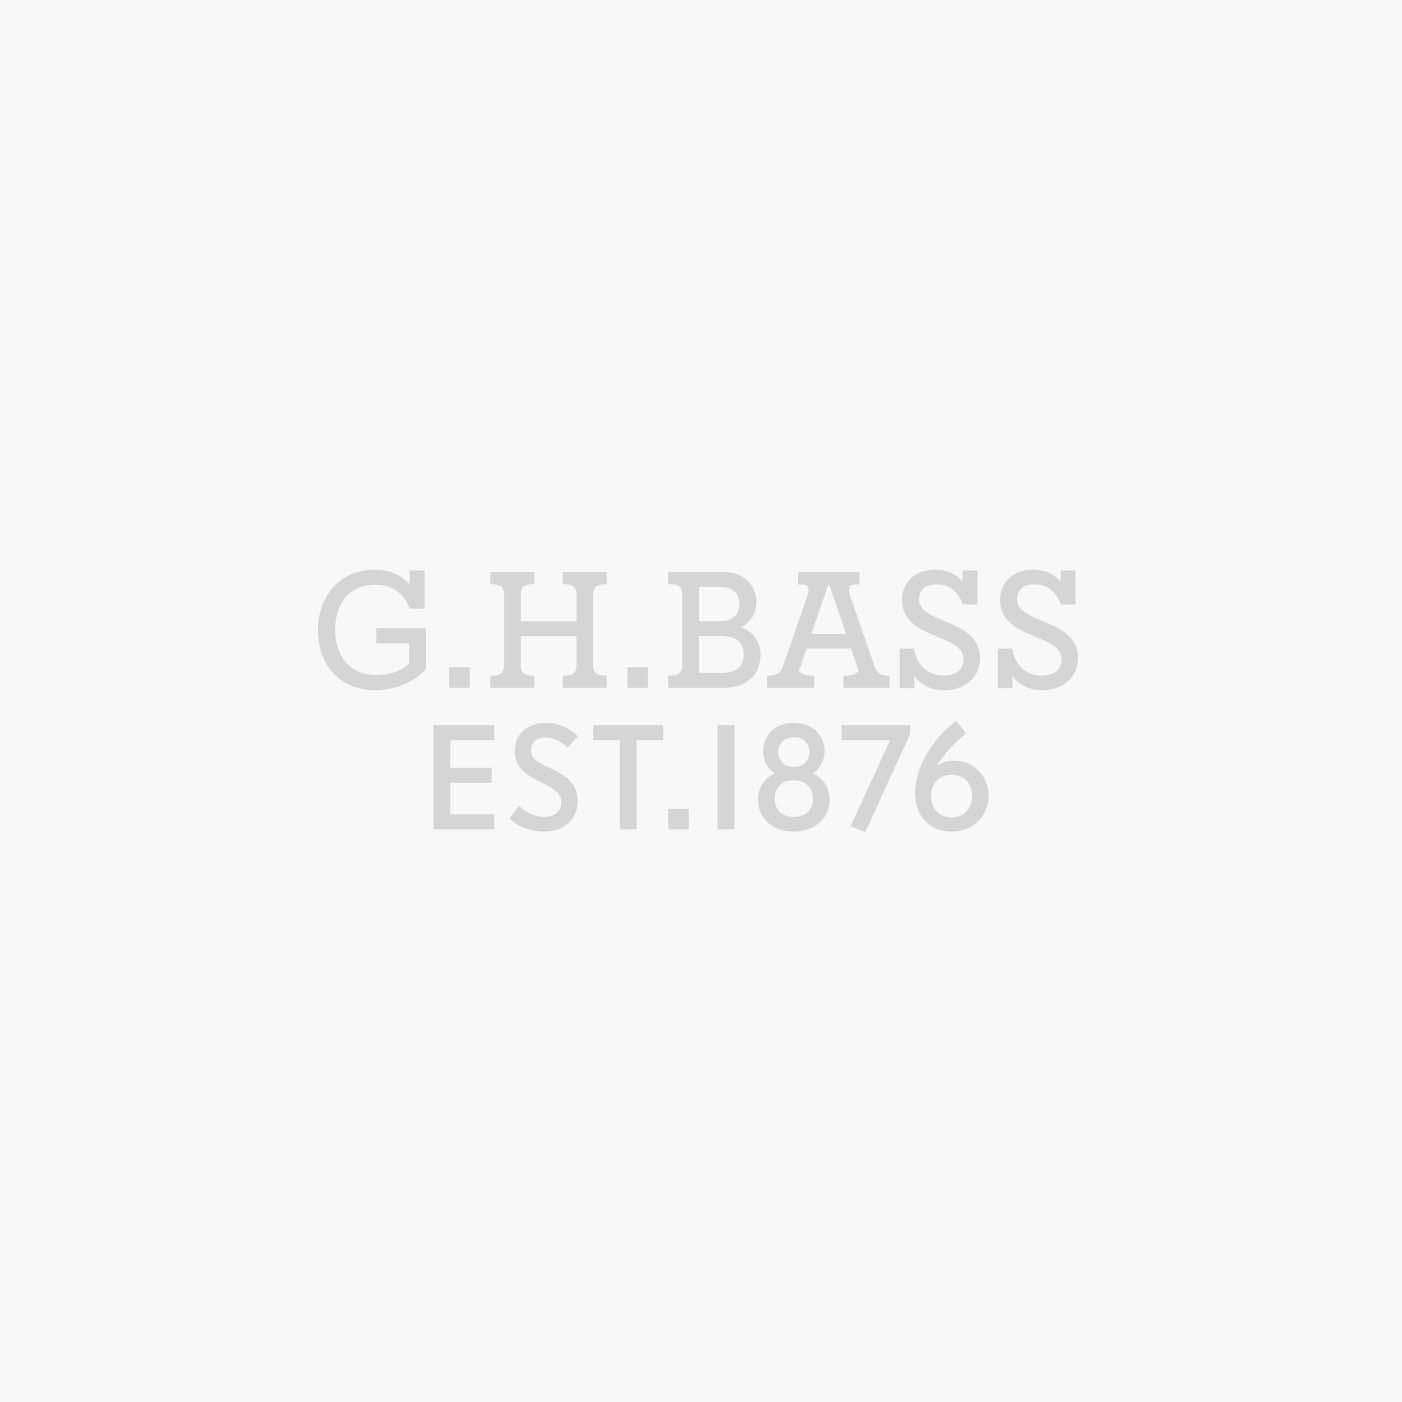 G.H.BASS: Crafted With Intention For Over 145 Years.